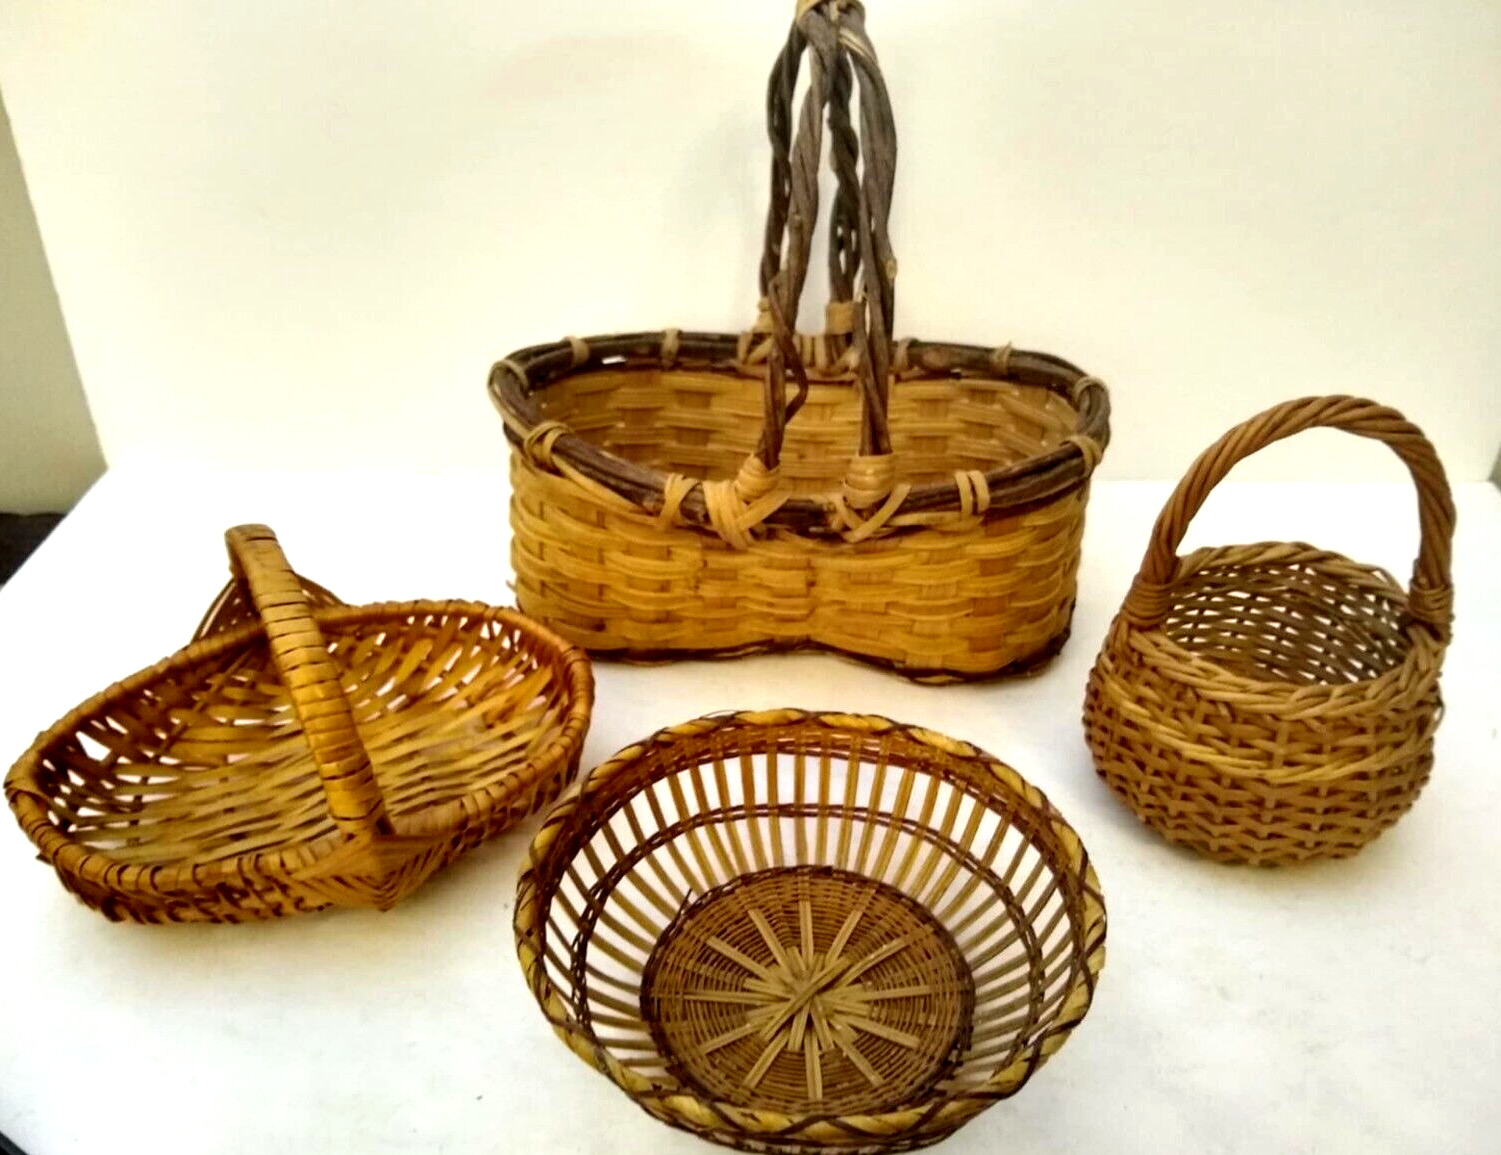 LOT of 4 vintage bamboo rattan wicker harvest BASKETS 1960's